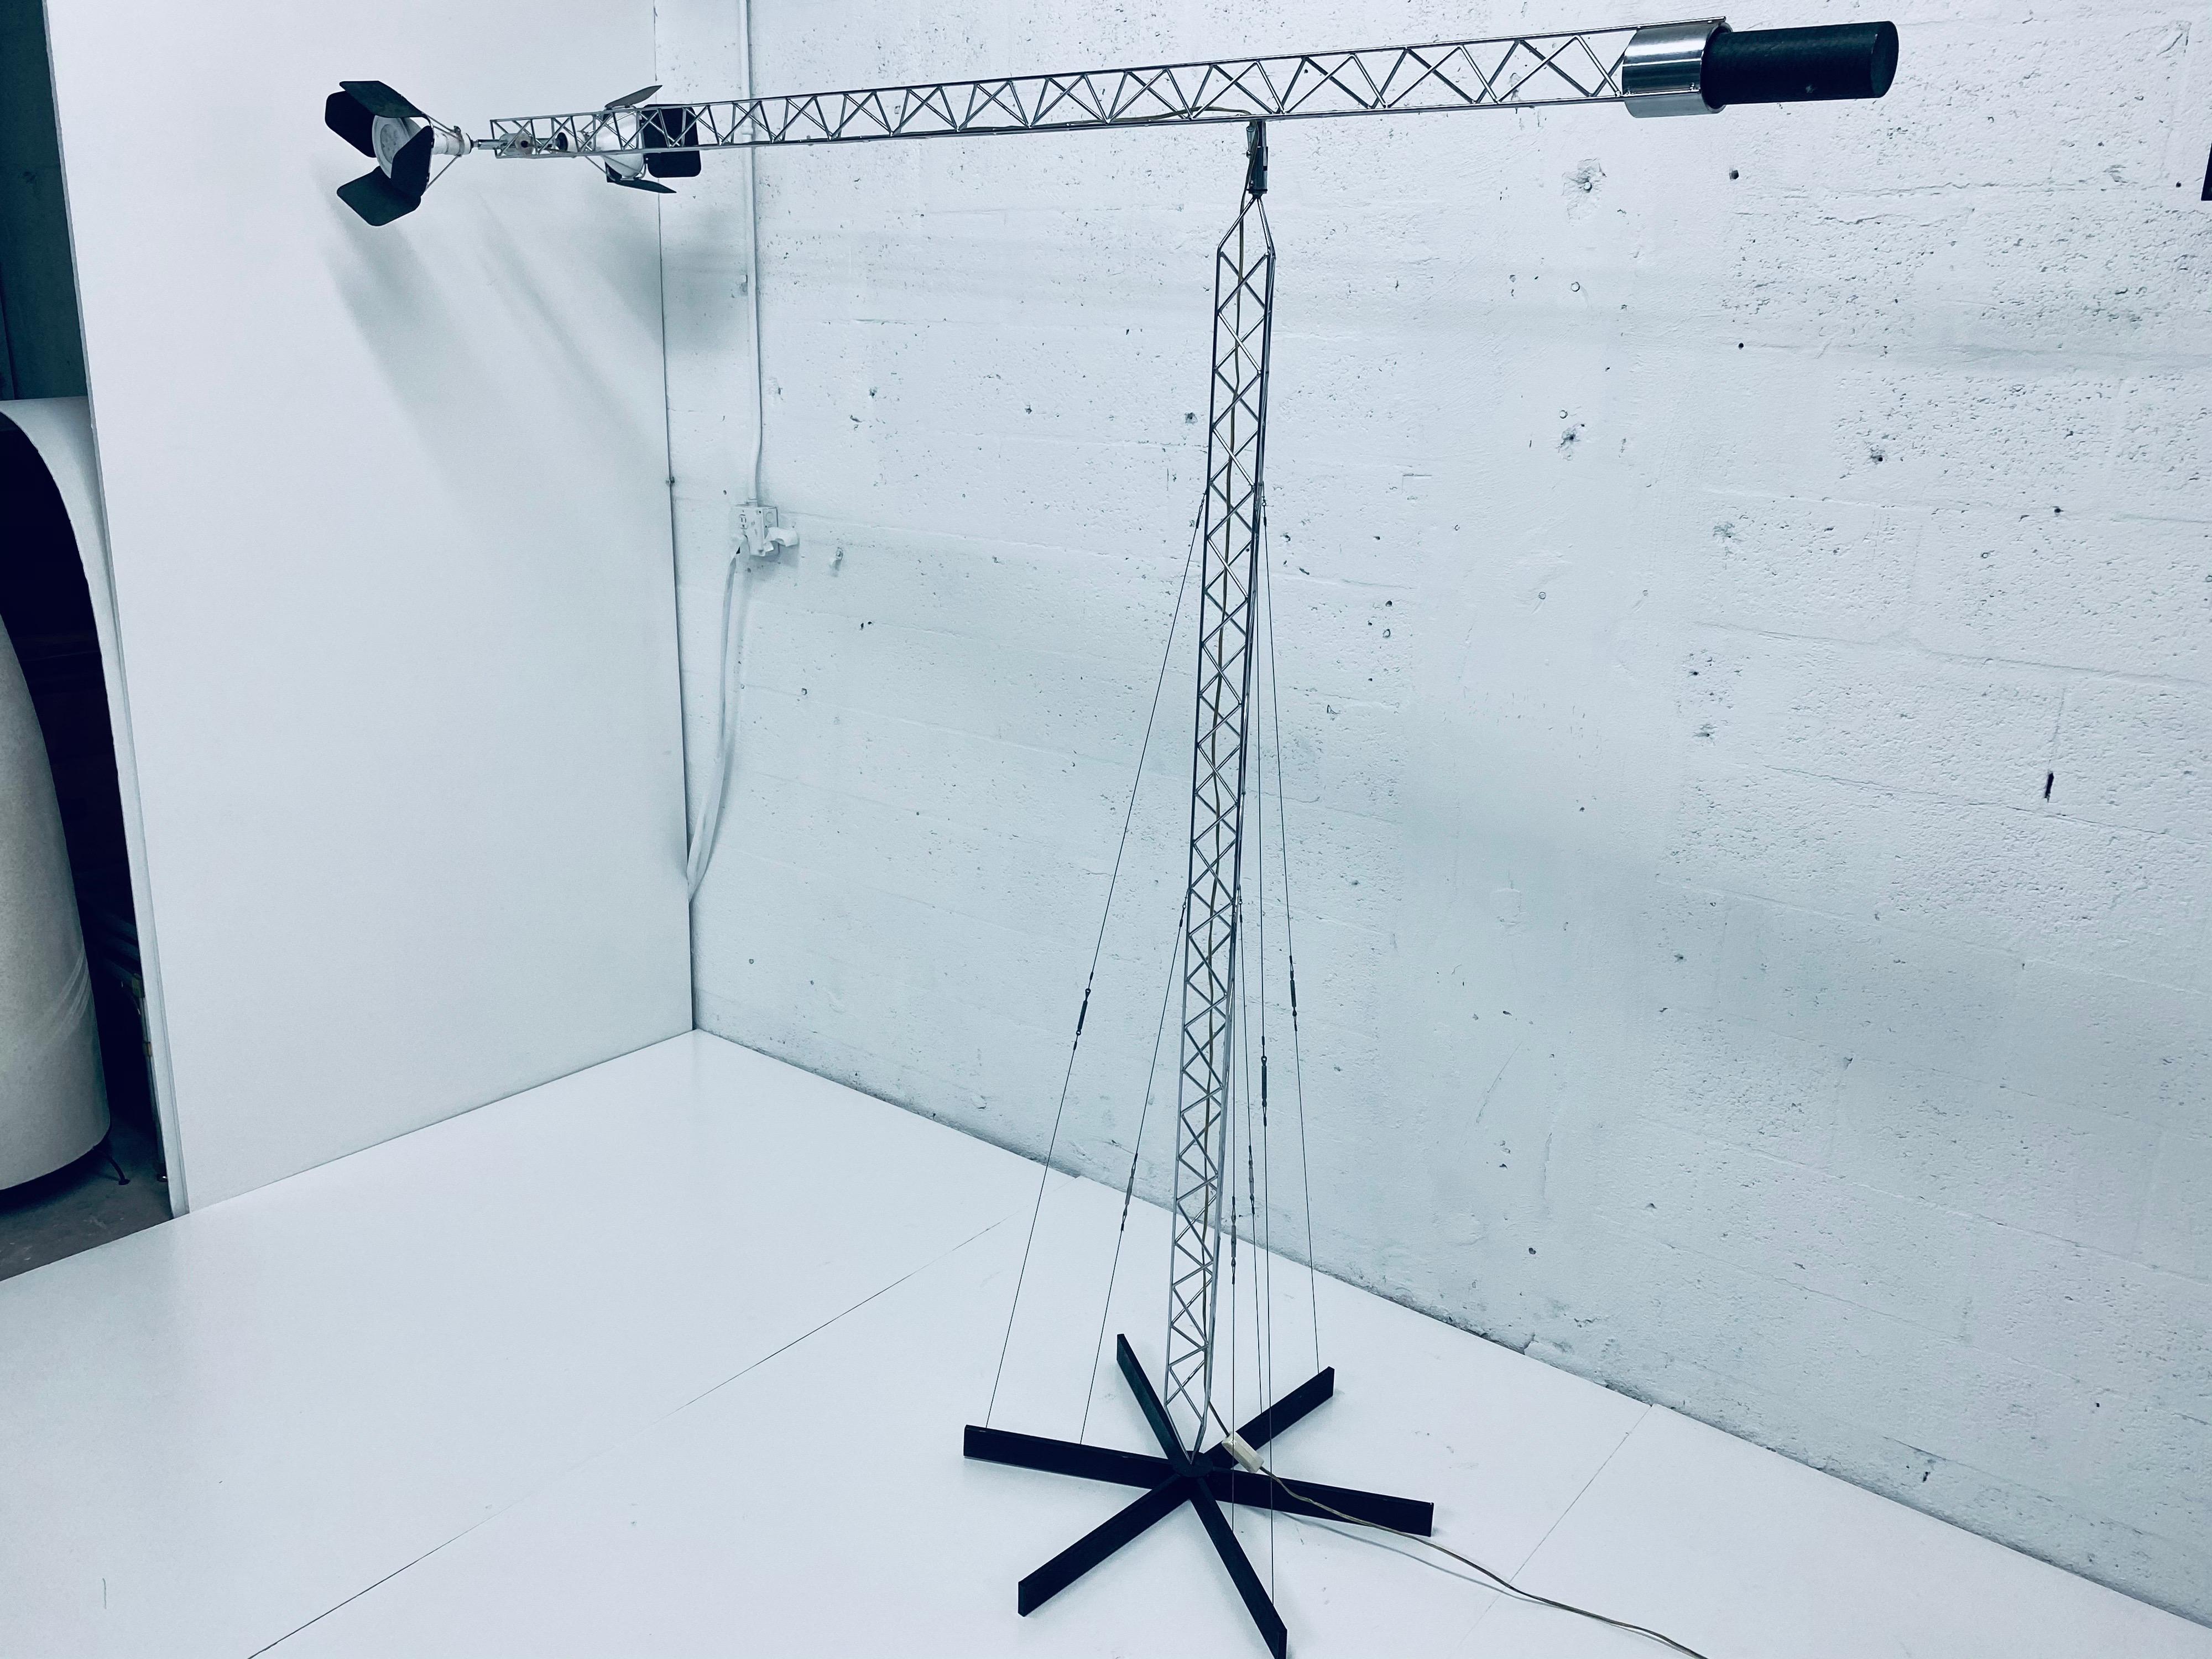 Large crane like chrome floor lamp designed by Curtis Jere from the 1970s. The lamp is adjustable up and down by utilizes a counter weight for stability and also swings 360 degrees. The spot lamps are also adjustable and can be pointed to the side